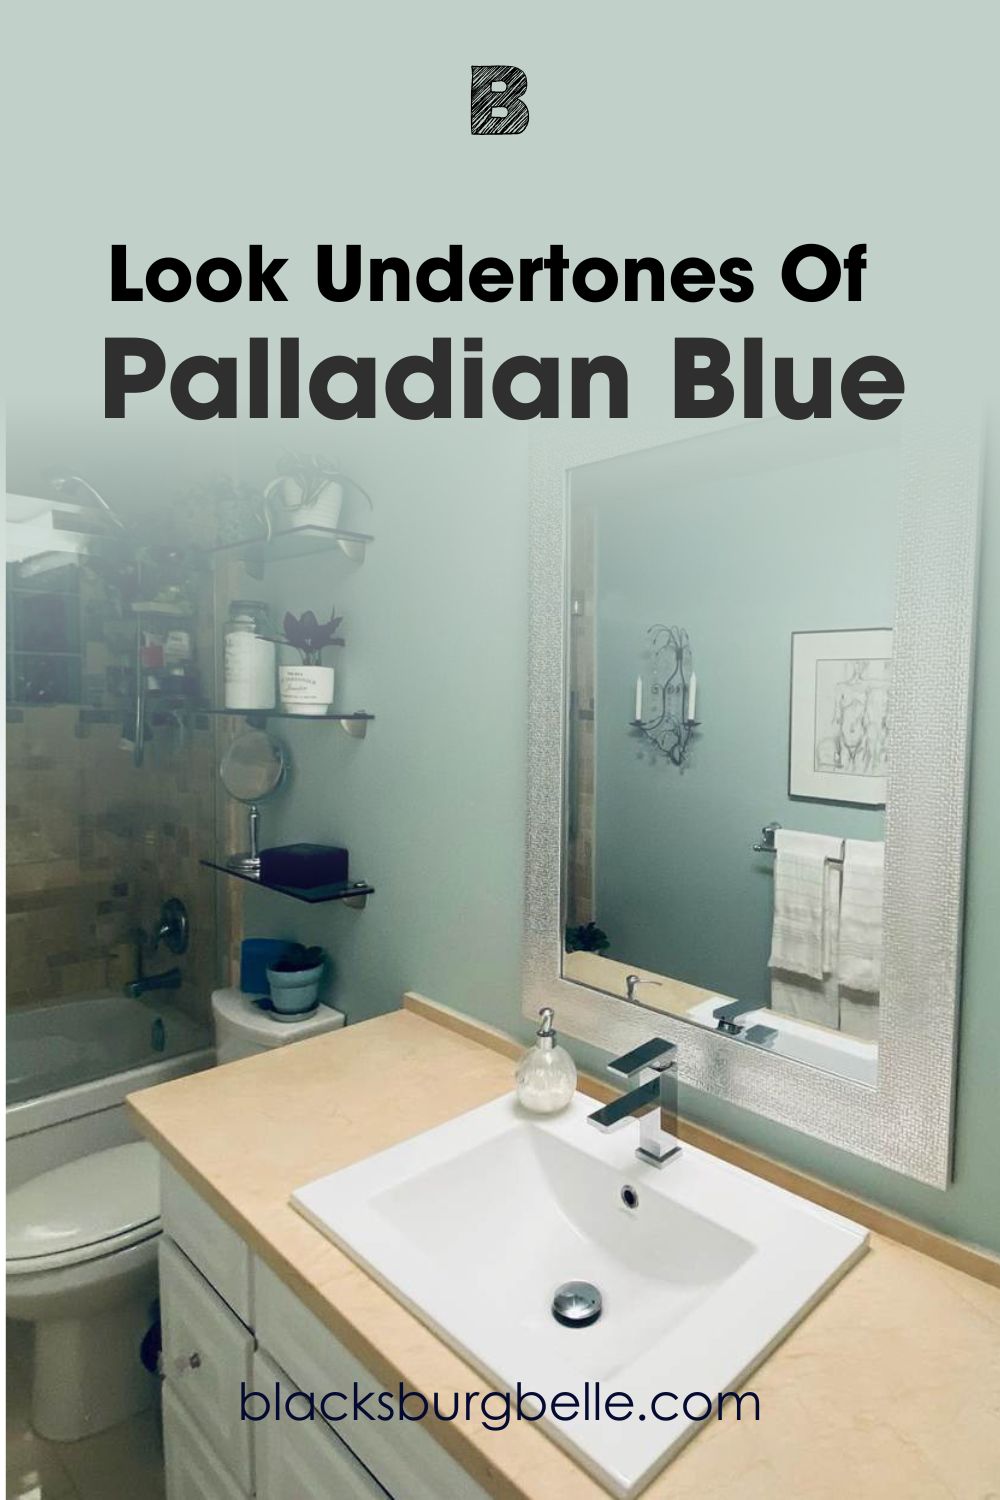 Picking Up on the Undertones of Palladian Blue